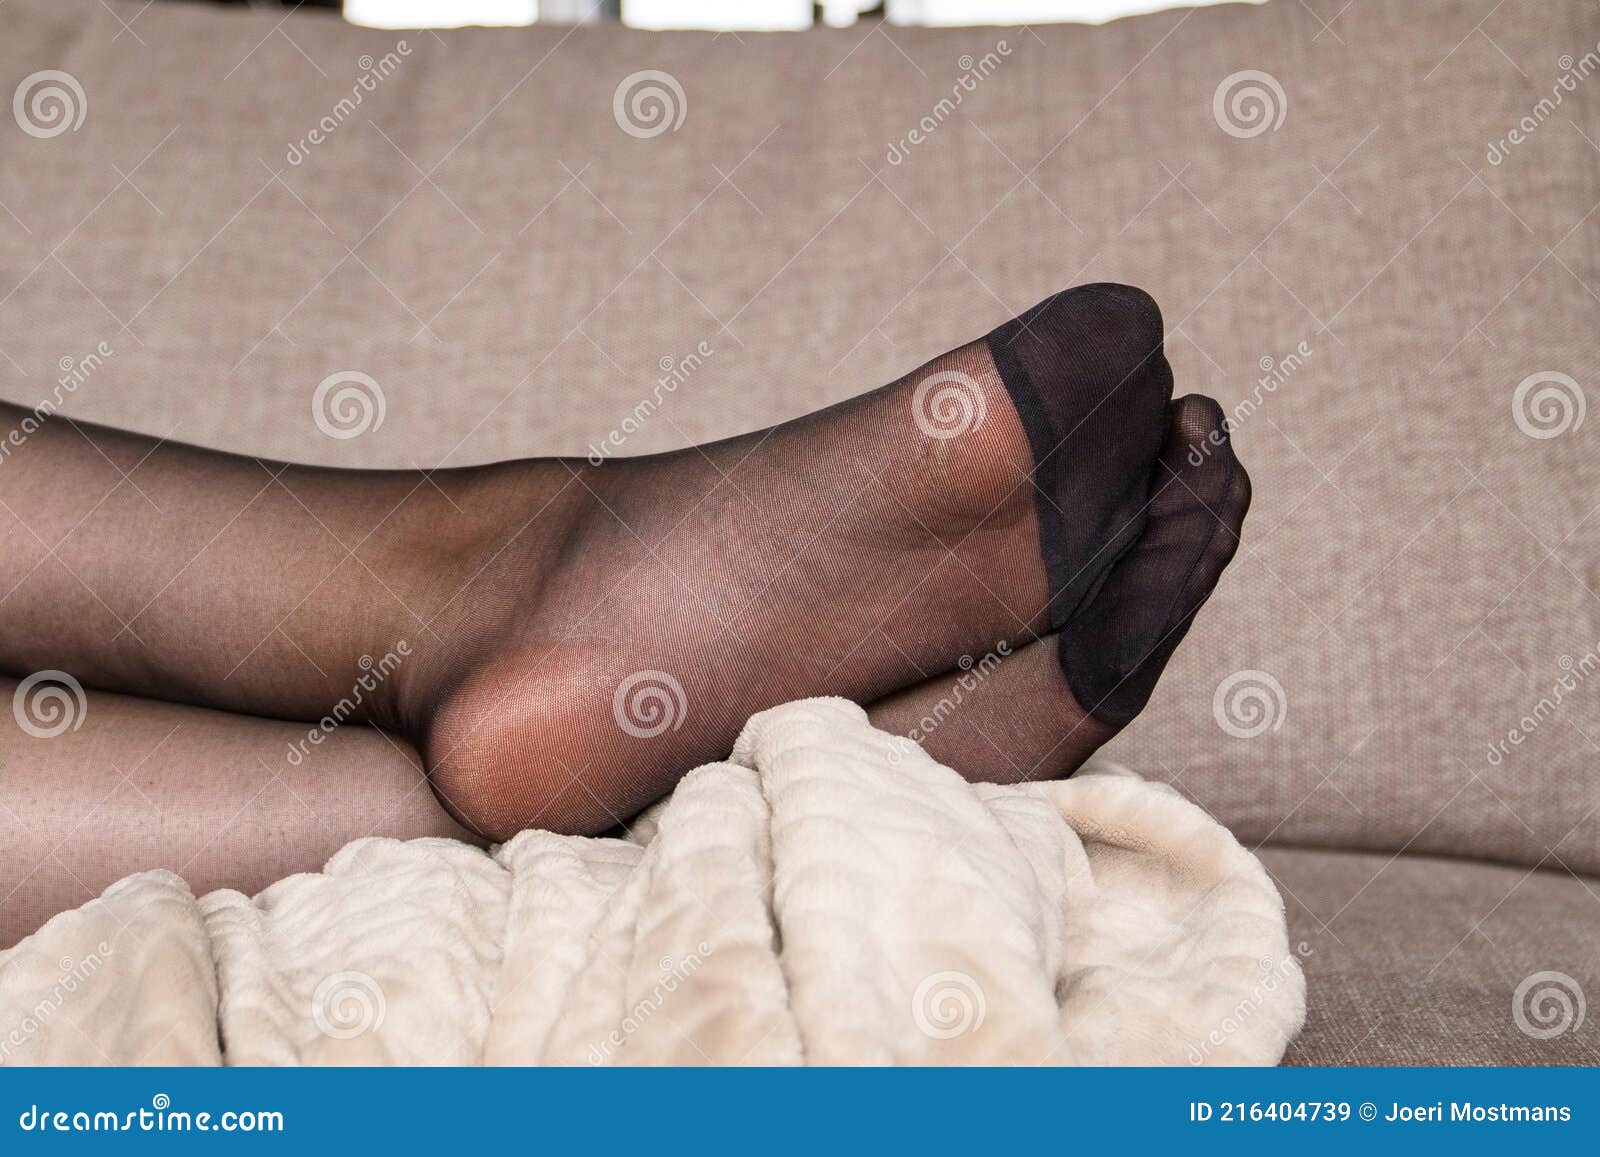 A Portrait of the Legs and Feet of a Woman in Black Nylon Stockings or  Pantyhose Lying on a Couch in a Living Room with Her Legs Stock Image -  Image of